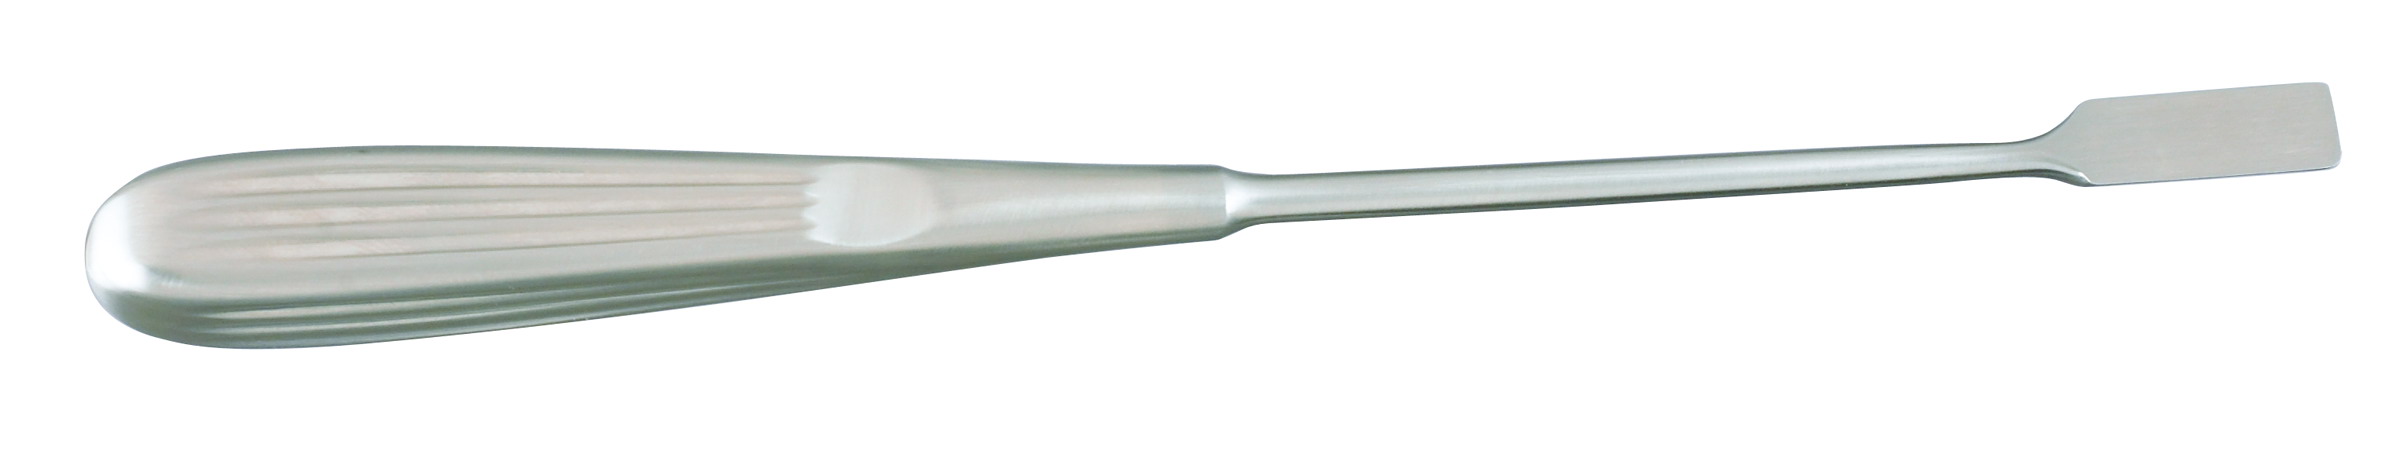 frontotemporal-dissector-9-23-cm-length-straight-10mm-wid-blade-21-52-miltex.jpg